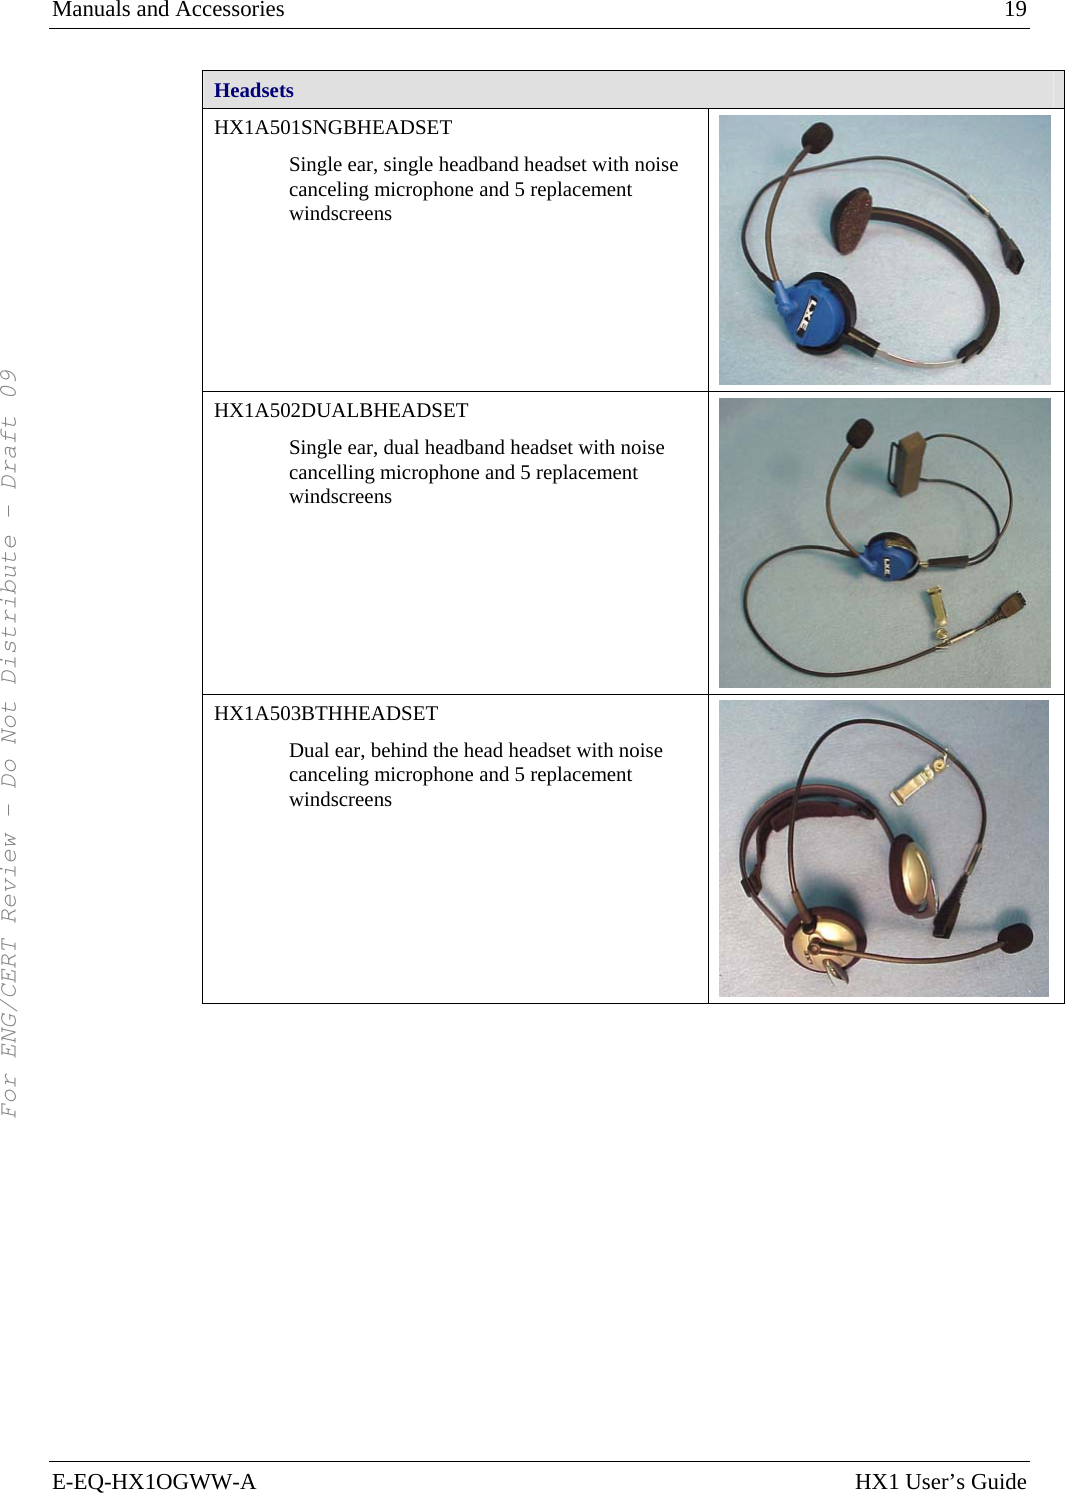 Manuals and Accessories    19 E-EQ-HX1OGWW-A  HX1 User’s Guide Headsets HX1A501SNGBHEADSET Single ear, single headband headset with noise canceling microphone and 5 replacement windscreens  HX1A502DUALBHEADSET Single ear, dual headband headset with noise cancelling microphone and 5 replacement windscreens  HX1A503BTHHEADSET  Dual ear, behind the head headset with noise canceling microphone and 5 replacement windscreens  For ENG/CERT Review - Do Not Distribute - Draft 09